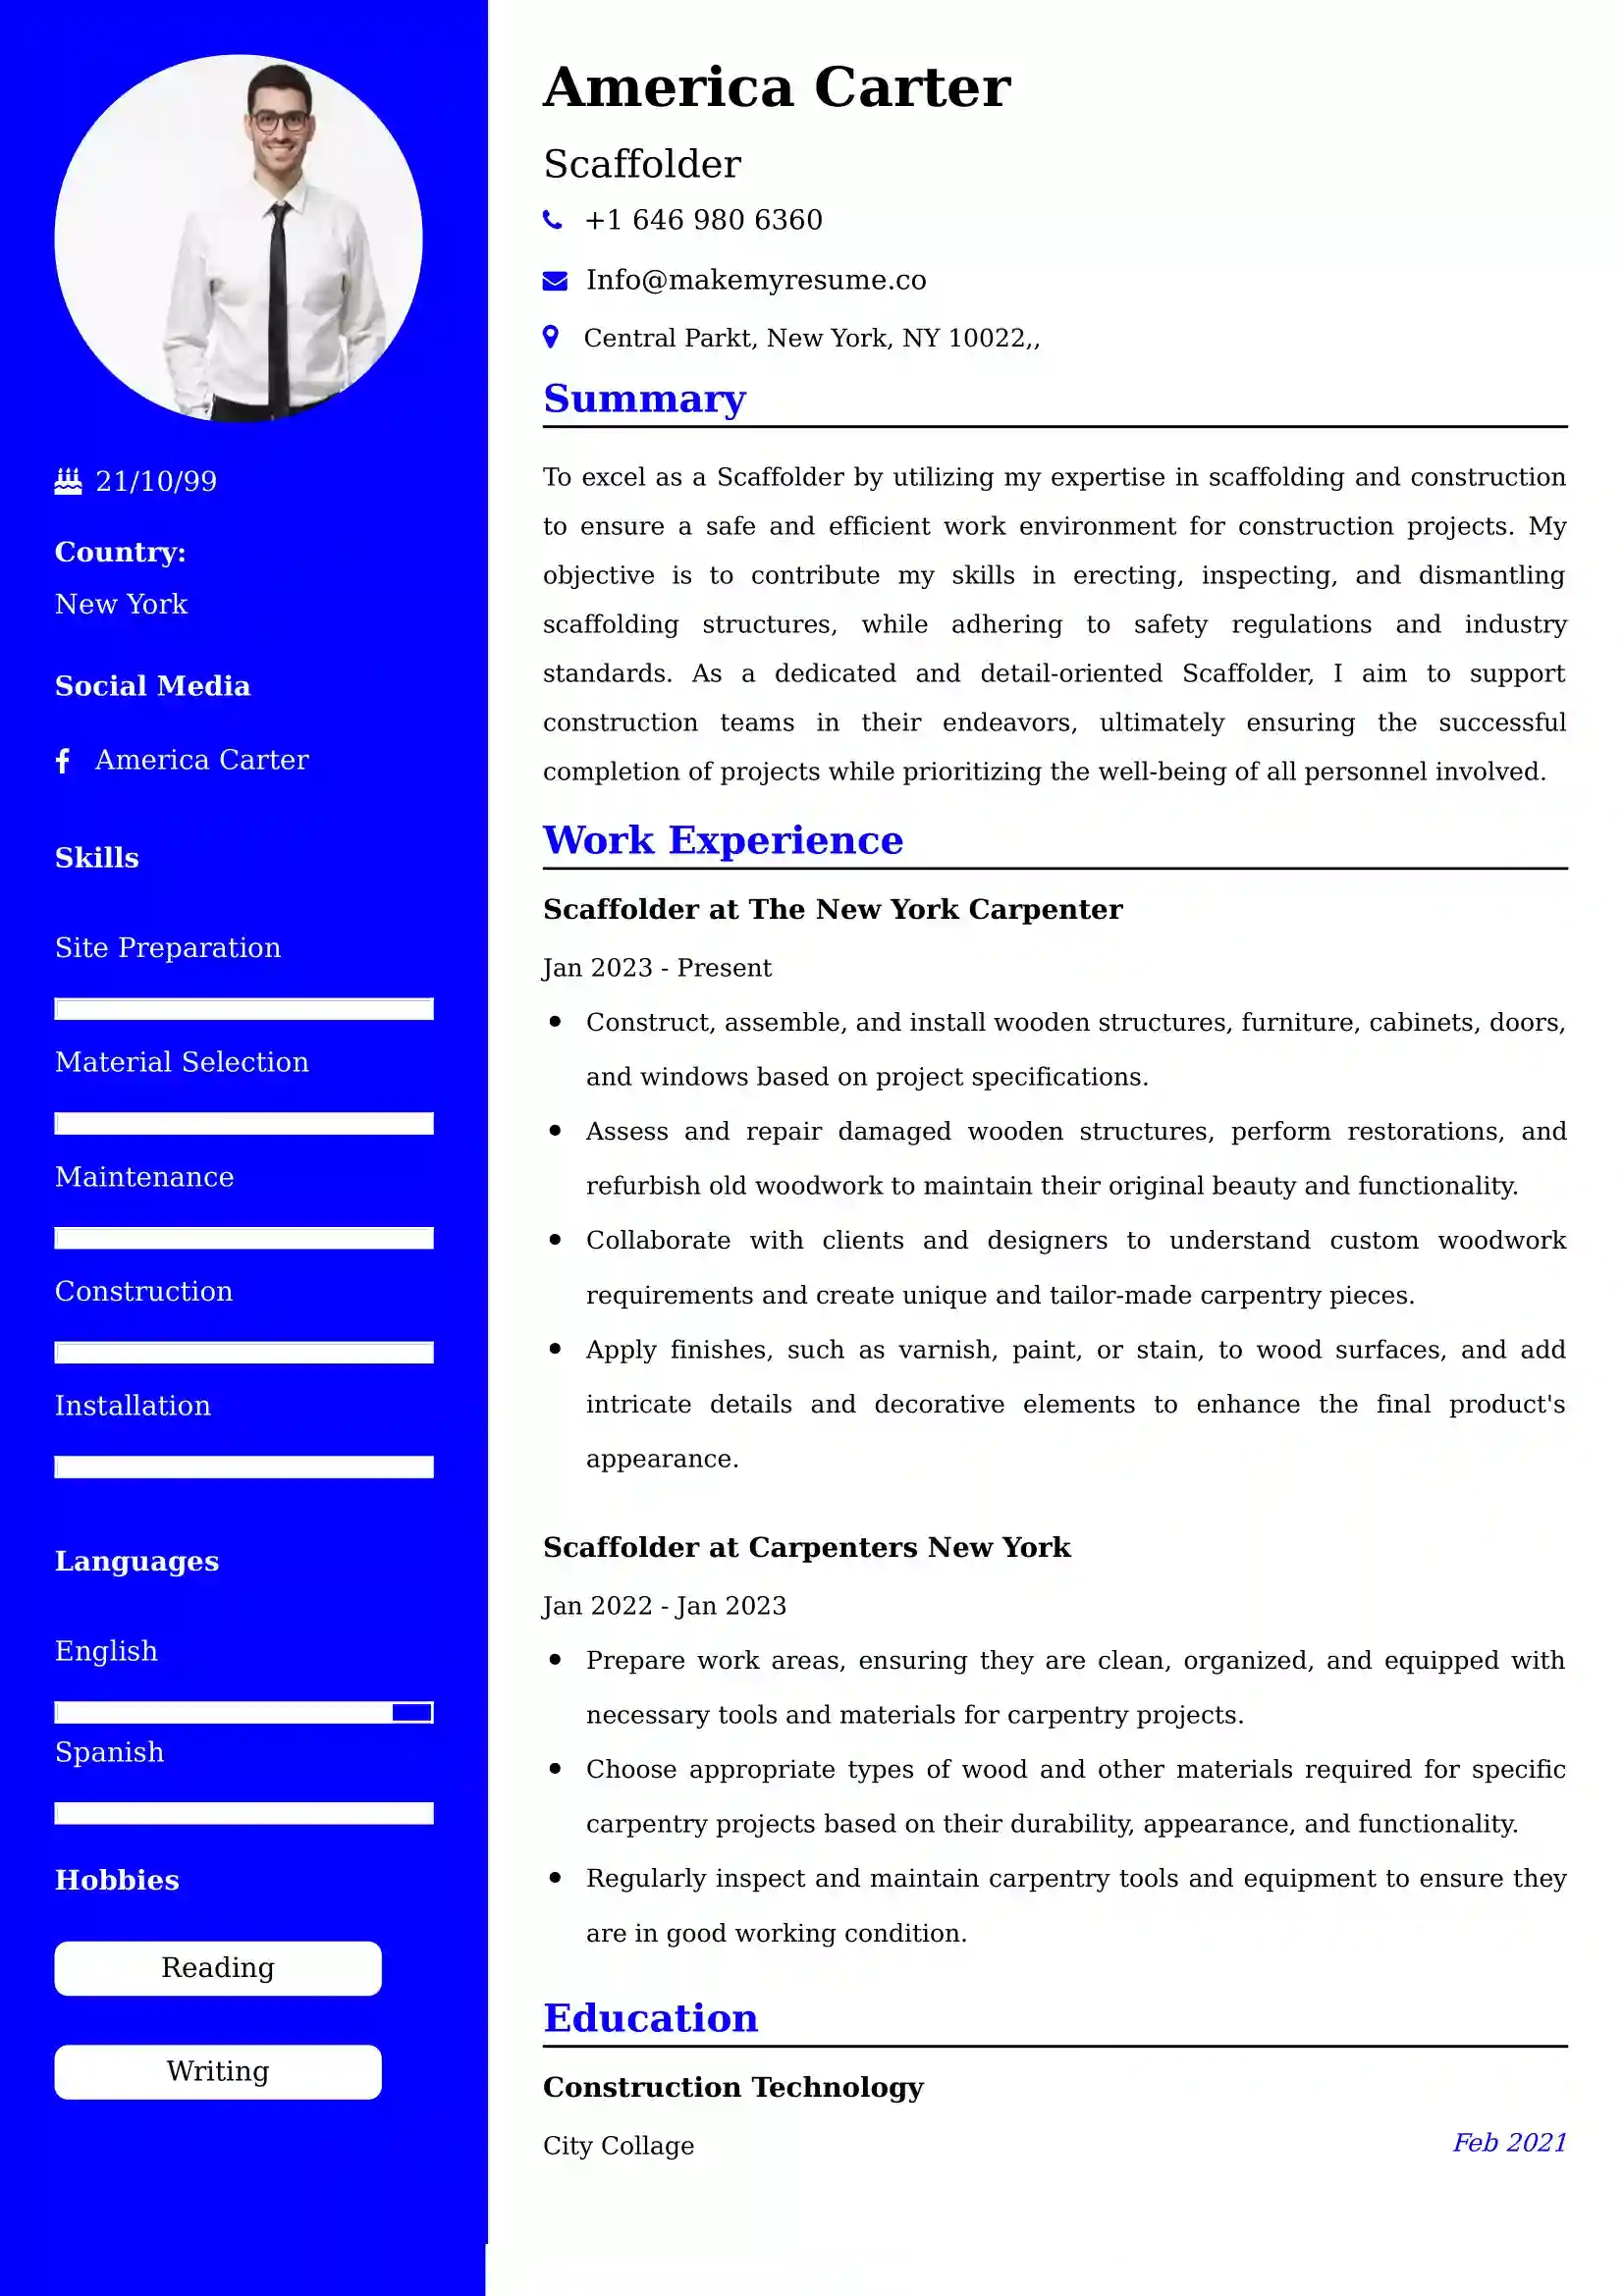 Scaffolder Resume Examples - UK Format, Latest Template.